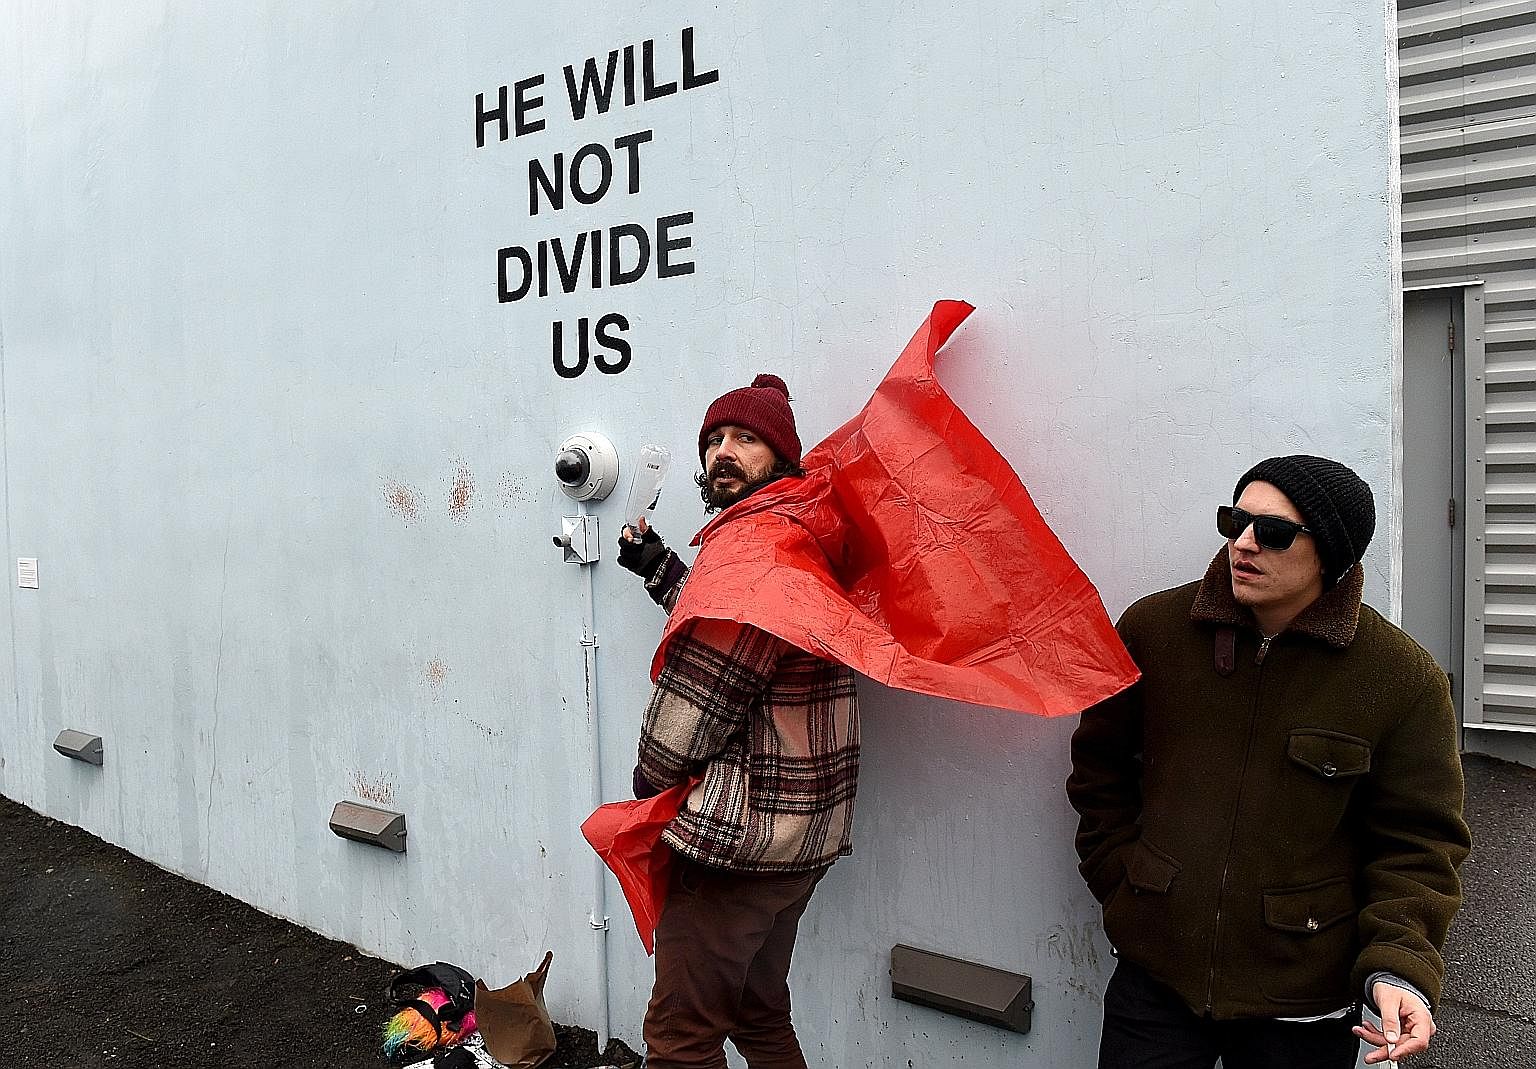 American actor Shia LaBeouf (left) during a livestream of his "He Will Not Divide Us" project in New York on Jan 24. The project has had to relocate for the fourth time due to disruptions by 4chan users.